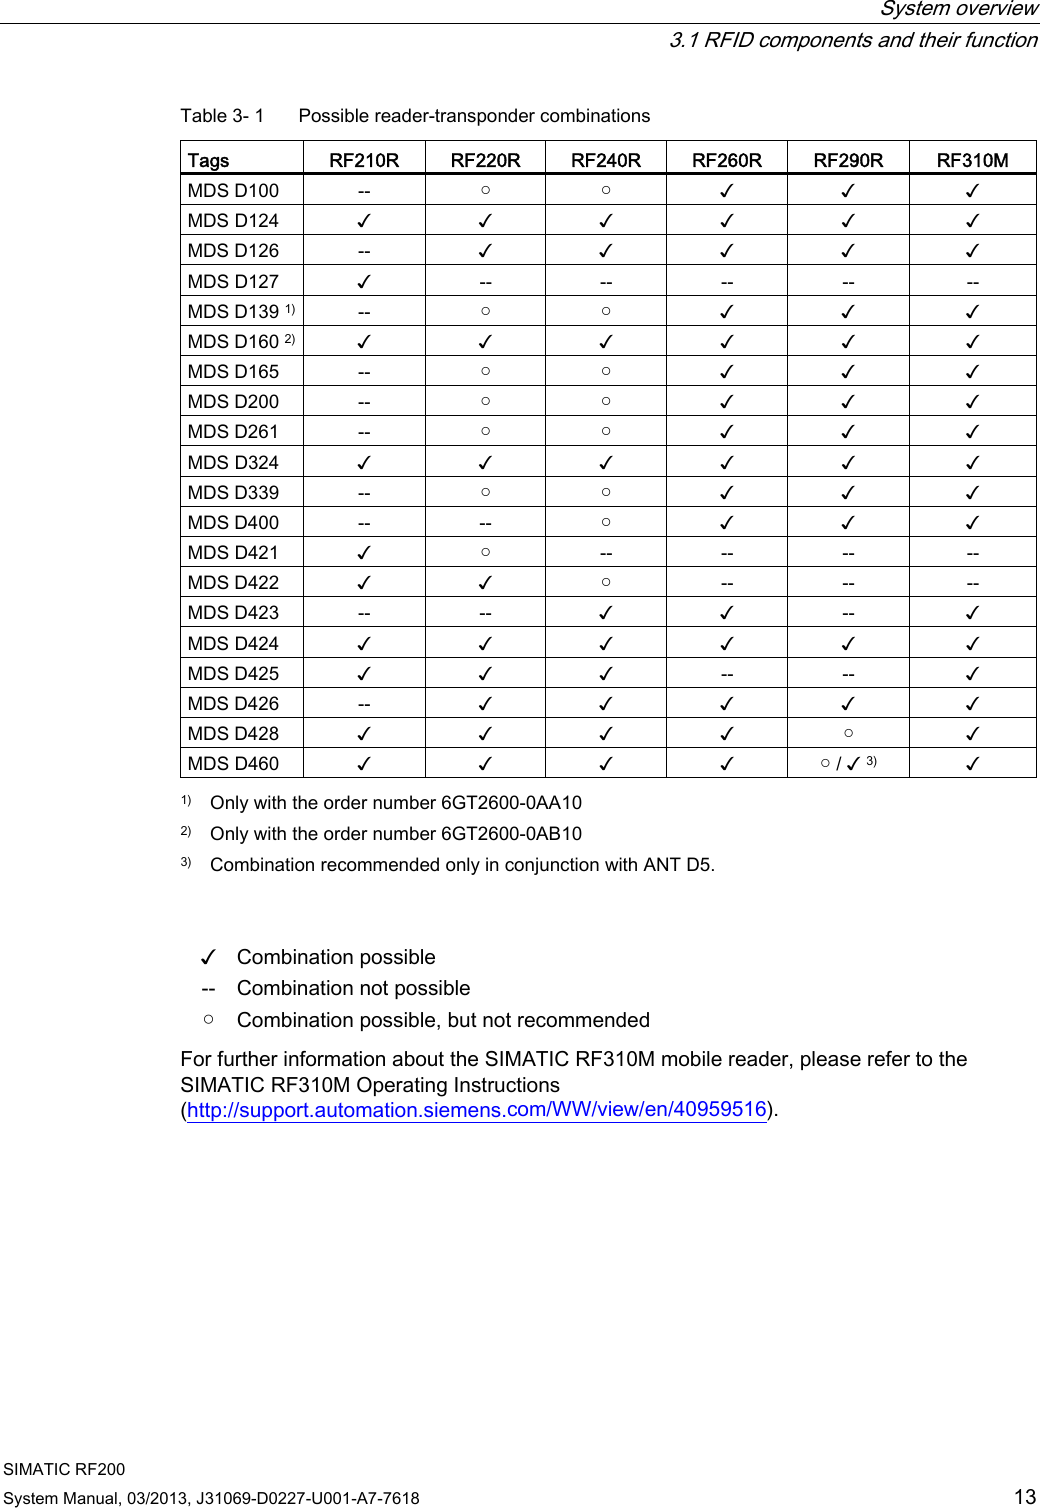  System overview   3.1 RFID components and their function SIMATIC RF200 System Manual, 03/2013, J31069-D0227-U001-A7-7618  13 Table 3- 1  Possible reader-transponder combinations  Tags  RF210R  RF220R  RF240R  RF260R  RF290R  RF310M MDS D100  --  ○  ○  ✓  ✓  ✓ MDS D124 ✓ ✓ ✓ ✓ ✓  ✓ MDS D126  --  ✓  ✓  ✓  ✓  ✓ MDS D127  ✓  --  --  --  --  -- MDS D139 1)  --  ○  ○  ✓  ✓  ✓ MDS D160 2) ✓ ✓ ✓ ✓ ✓  ✓ MDS D165  --  ○  ○  ✓  ✓  ✓ MDS D200  --  ○  ○  ✓  ✓  ✓ MDS D261  --  ○  ○  ✓  ✓  ✓ MDS D324 ✓ ✓ ✓ ✓ ✓  ✓ MDS D339  --  ○  ○  ✓  ✓  ✓ MDS D400  --  --  ○  ✓  ✓  ✓ MDS D421  ✓  ○  --  --  --  -- MDS D422  ✓  ✓  ○  --  --  -- MDS D423  --  --  ✓  ✓  --  ✓ MDS D424 ✓ ✓ ✓ ✓ ✓  ✓ MDS D425  ✓  ✓  ✓  --  --  ✓ MDS D426  --  ✓  ✓  ✓  ✓  ✓ MDS D428  ✓  ✓  ✓  ✓  ○  ✓ MDS D460  ✓  ✓  ✓  ✓  ○ / ✓ 3) ✓ 1)  Only with the order number 6GT2600-0AA10 2)  Only with the order number 6GT2600-0AB10 3)  Combination recommended only in conjunction with ANT D5.   ✓  Combination possible --  Combination not possible ○  Combination possible, but not recommended For further information about the SIMATIC RF310M mobile reader, please refer to the SIMATIC RF310M Operating Instructions (http://support.automation.siemens.com/WW/view/en/40959516). 